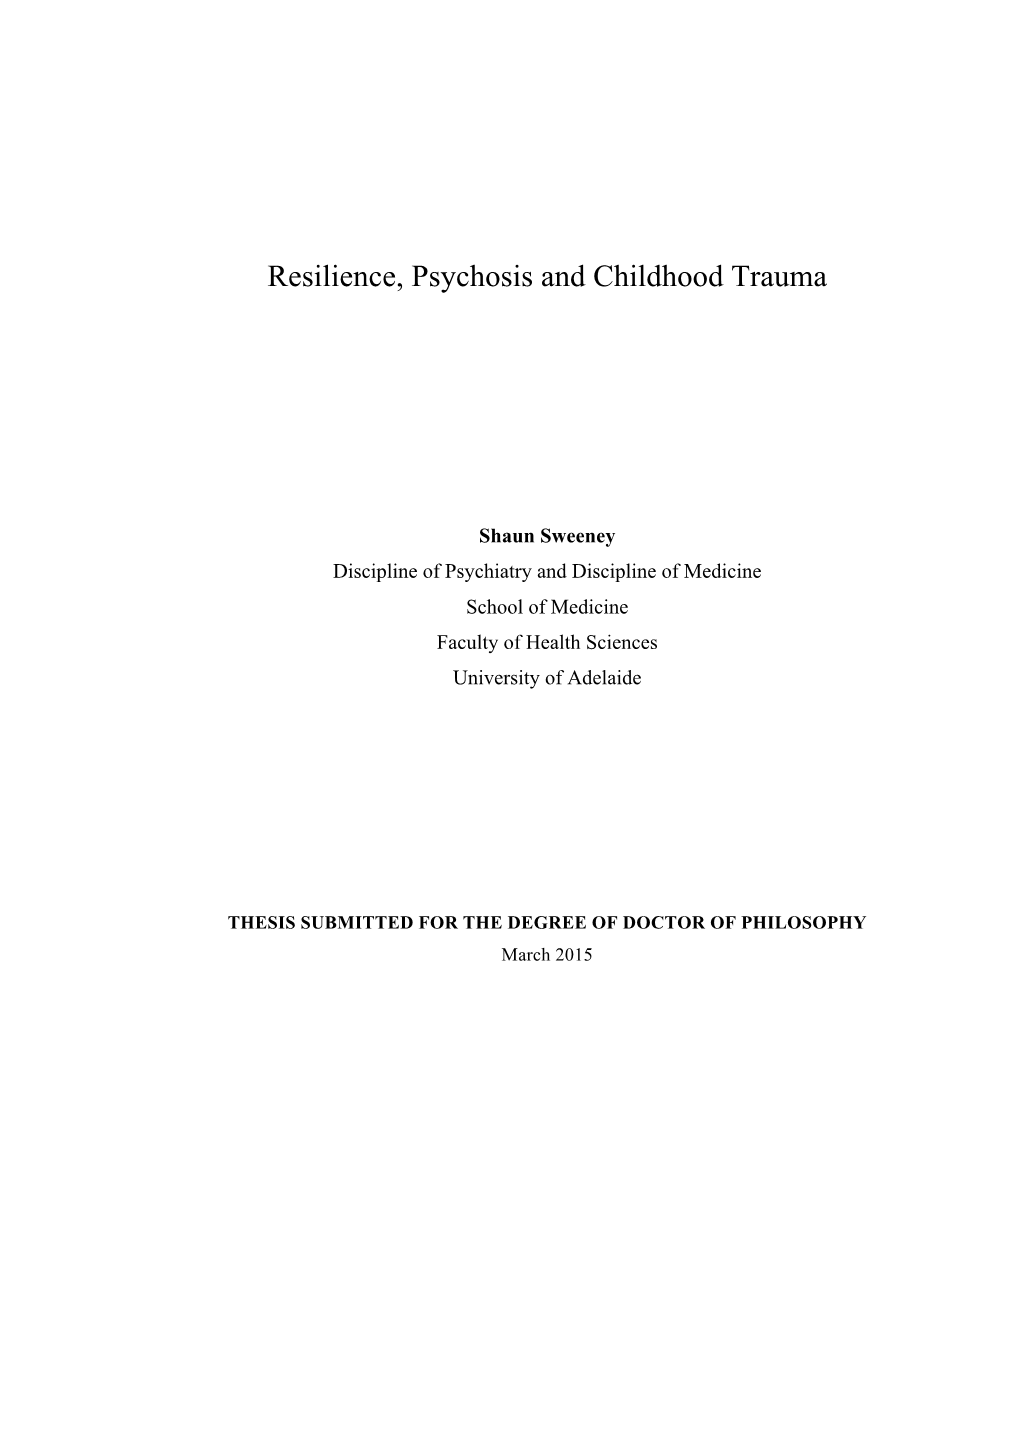 Resilience, Psychosis and Childhood Trauma